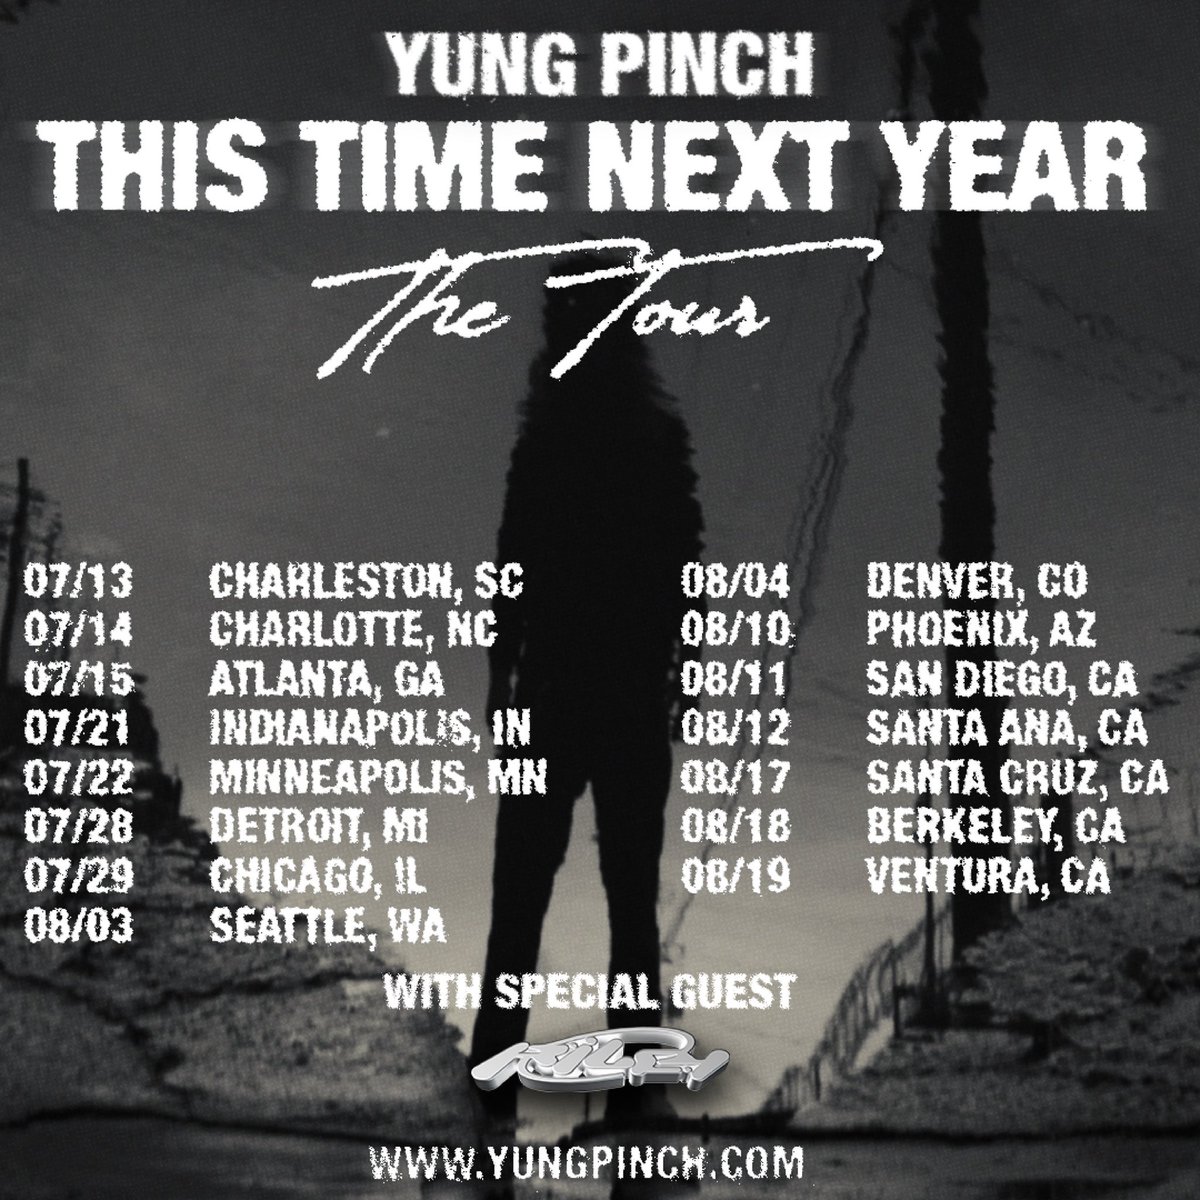 coming to a city near you..🎟️🎬🔜
#THISTIMENEXTYEAR #THETOUR 

yungpinch.com